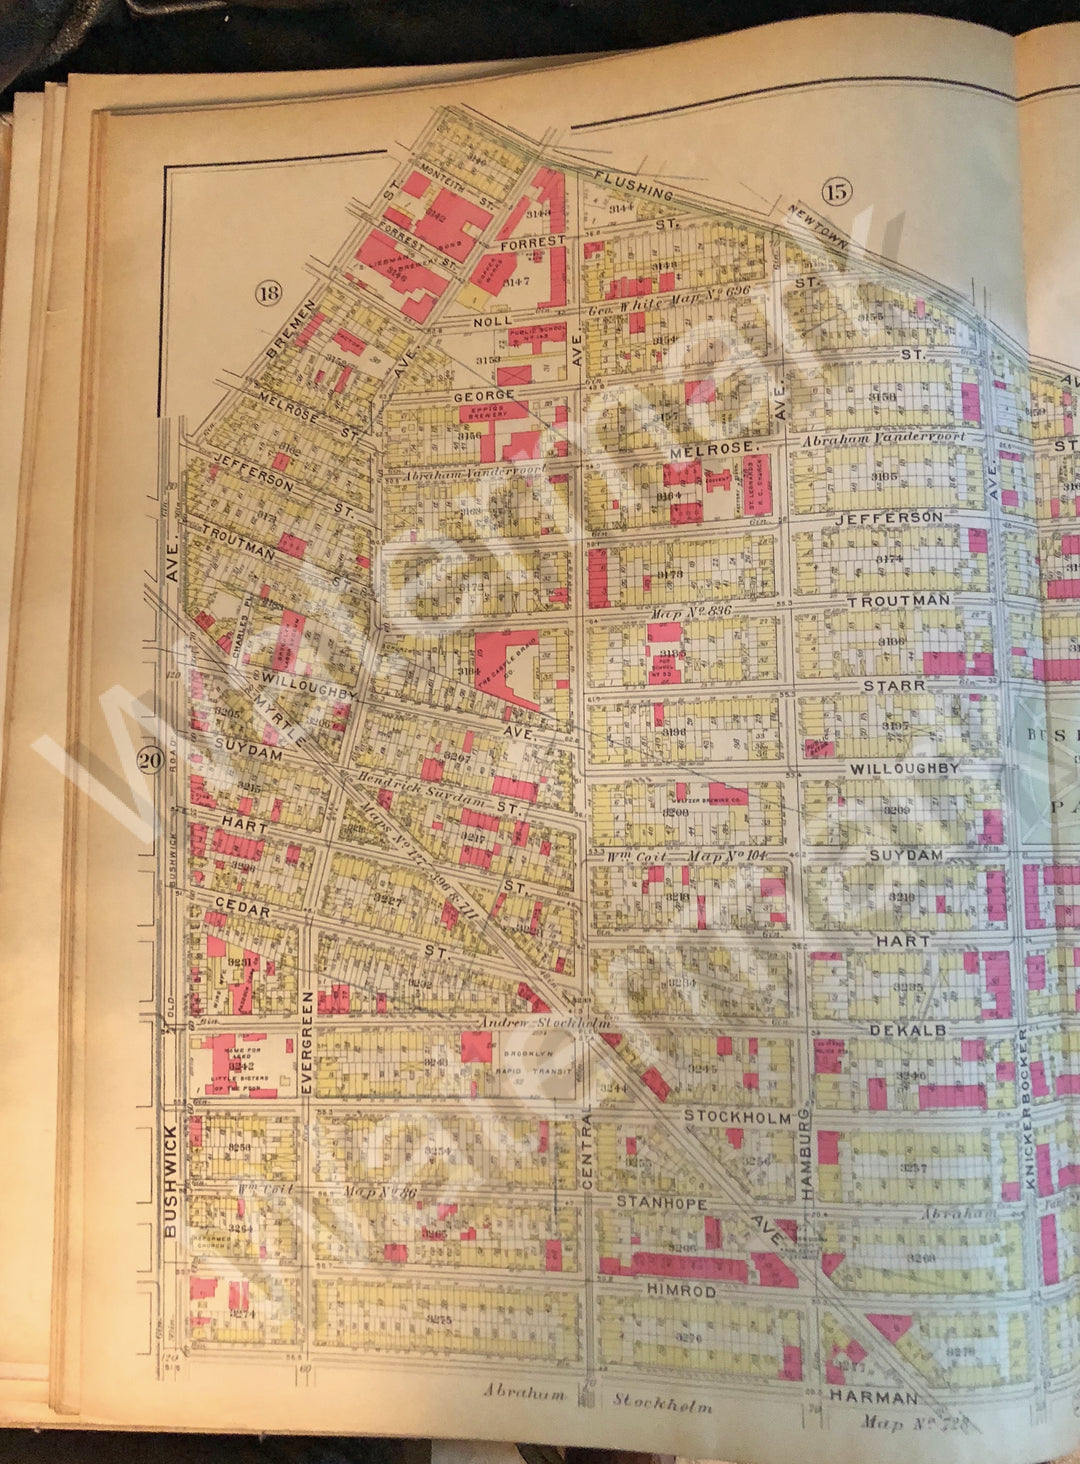 Antique Brooklyn Map 1908 Plate 17 Part of Section 2 - Bushwick Park Myrtle Irving Wyckoff ++ - Deal Changer